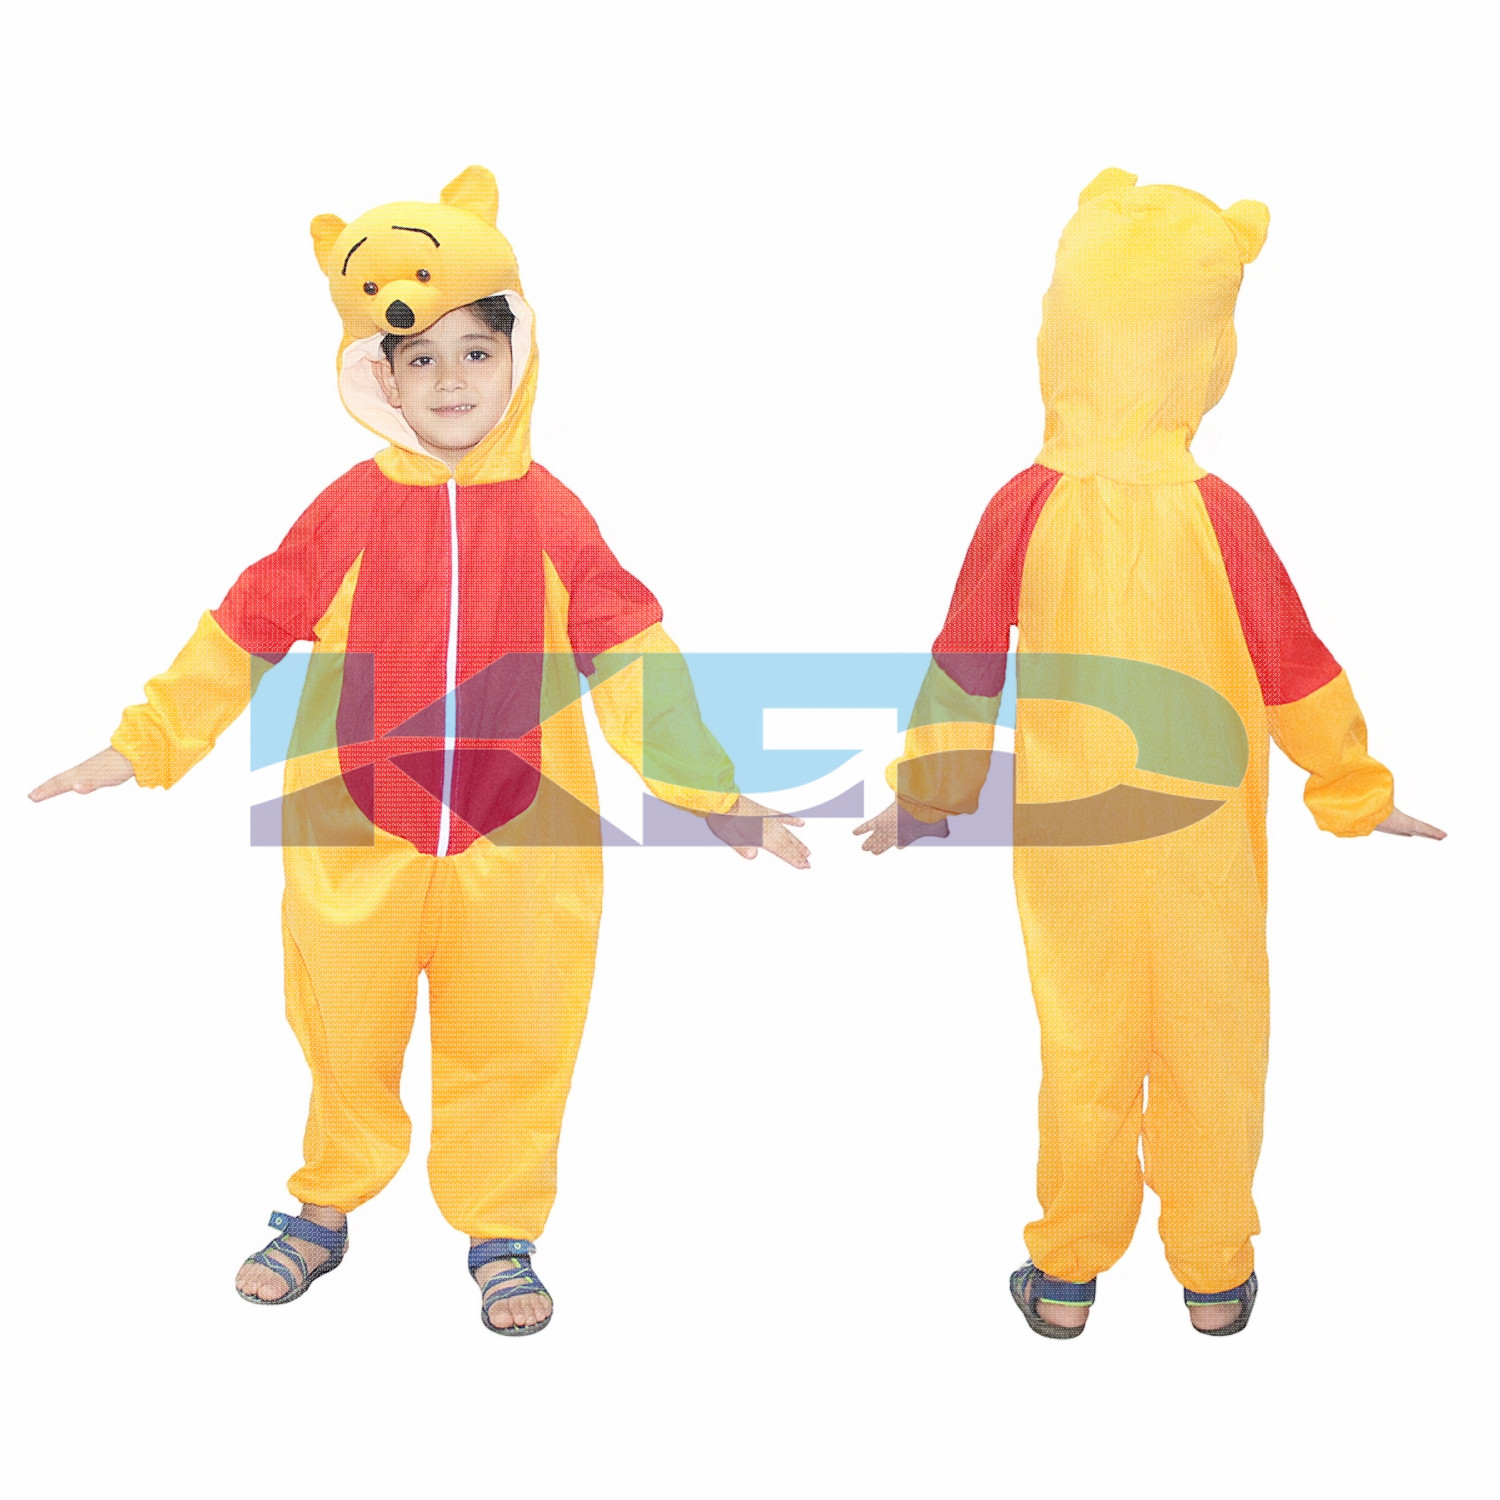 Pooh Fancy dress for kids,Diseny Cartoon Costume for Annual function/Theme Party/Stage Shows/Competition/Birthday Party Dress